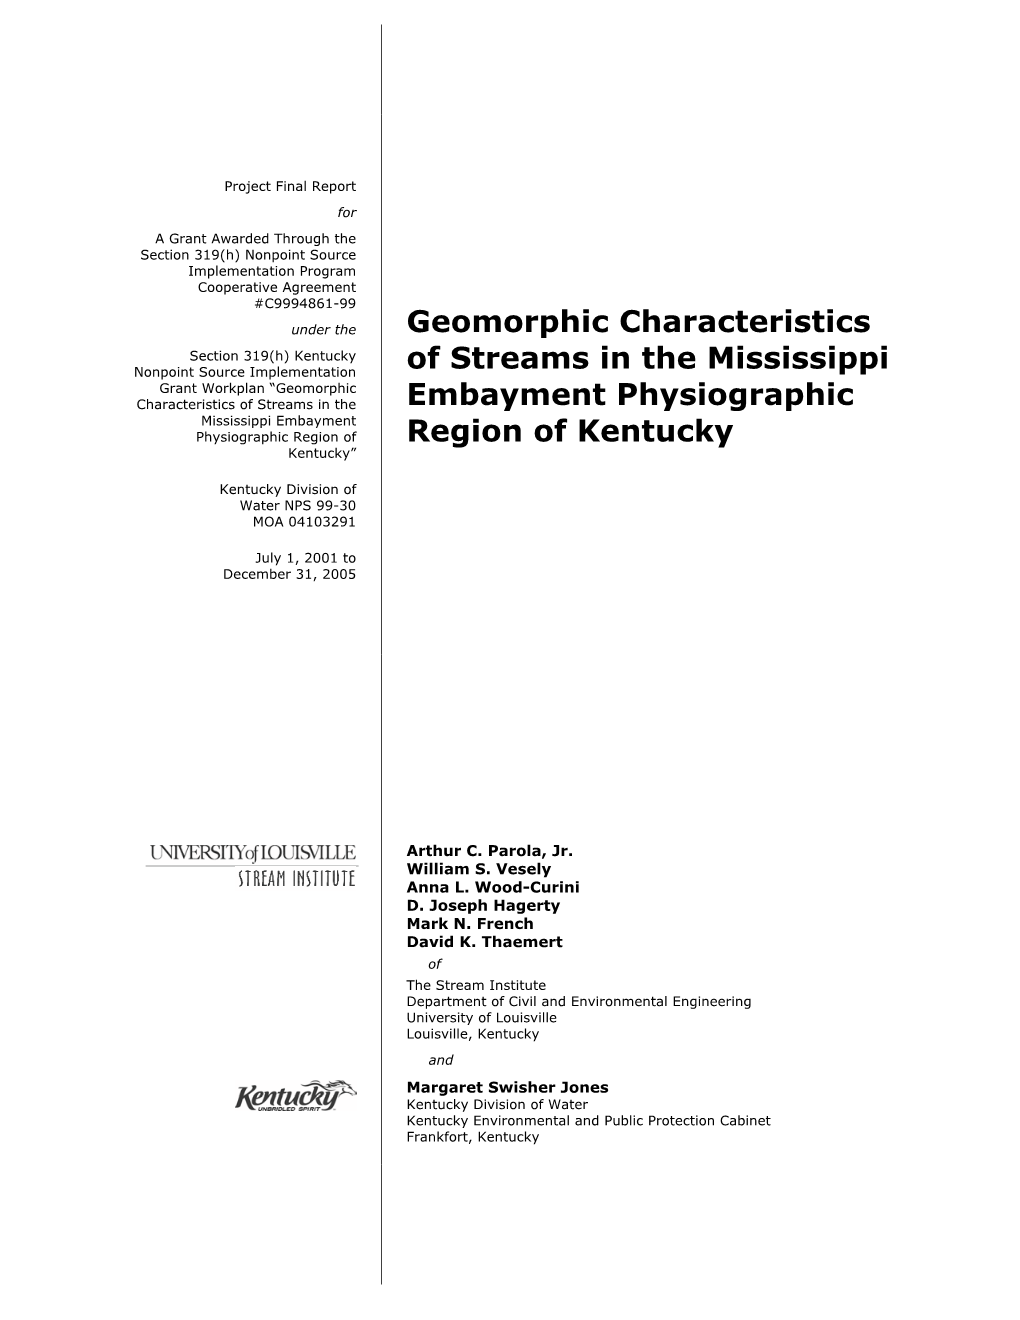 Geomorphic Characteristics of Streams in the Mississippi